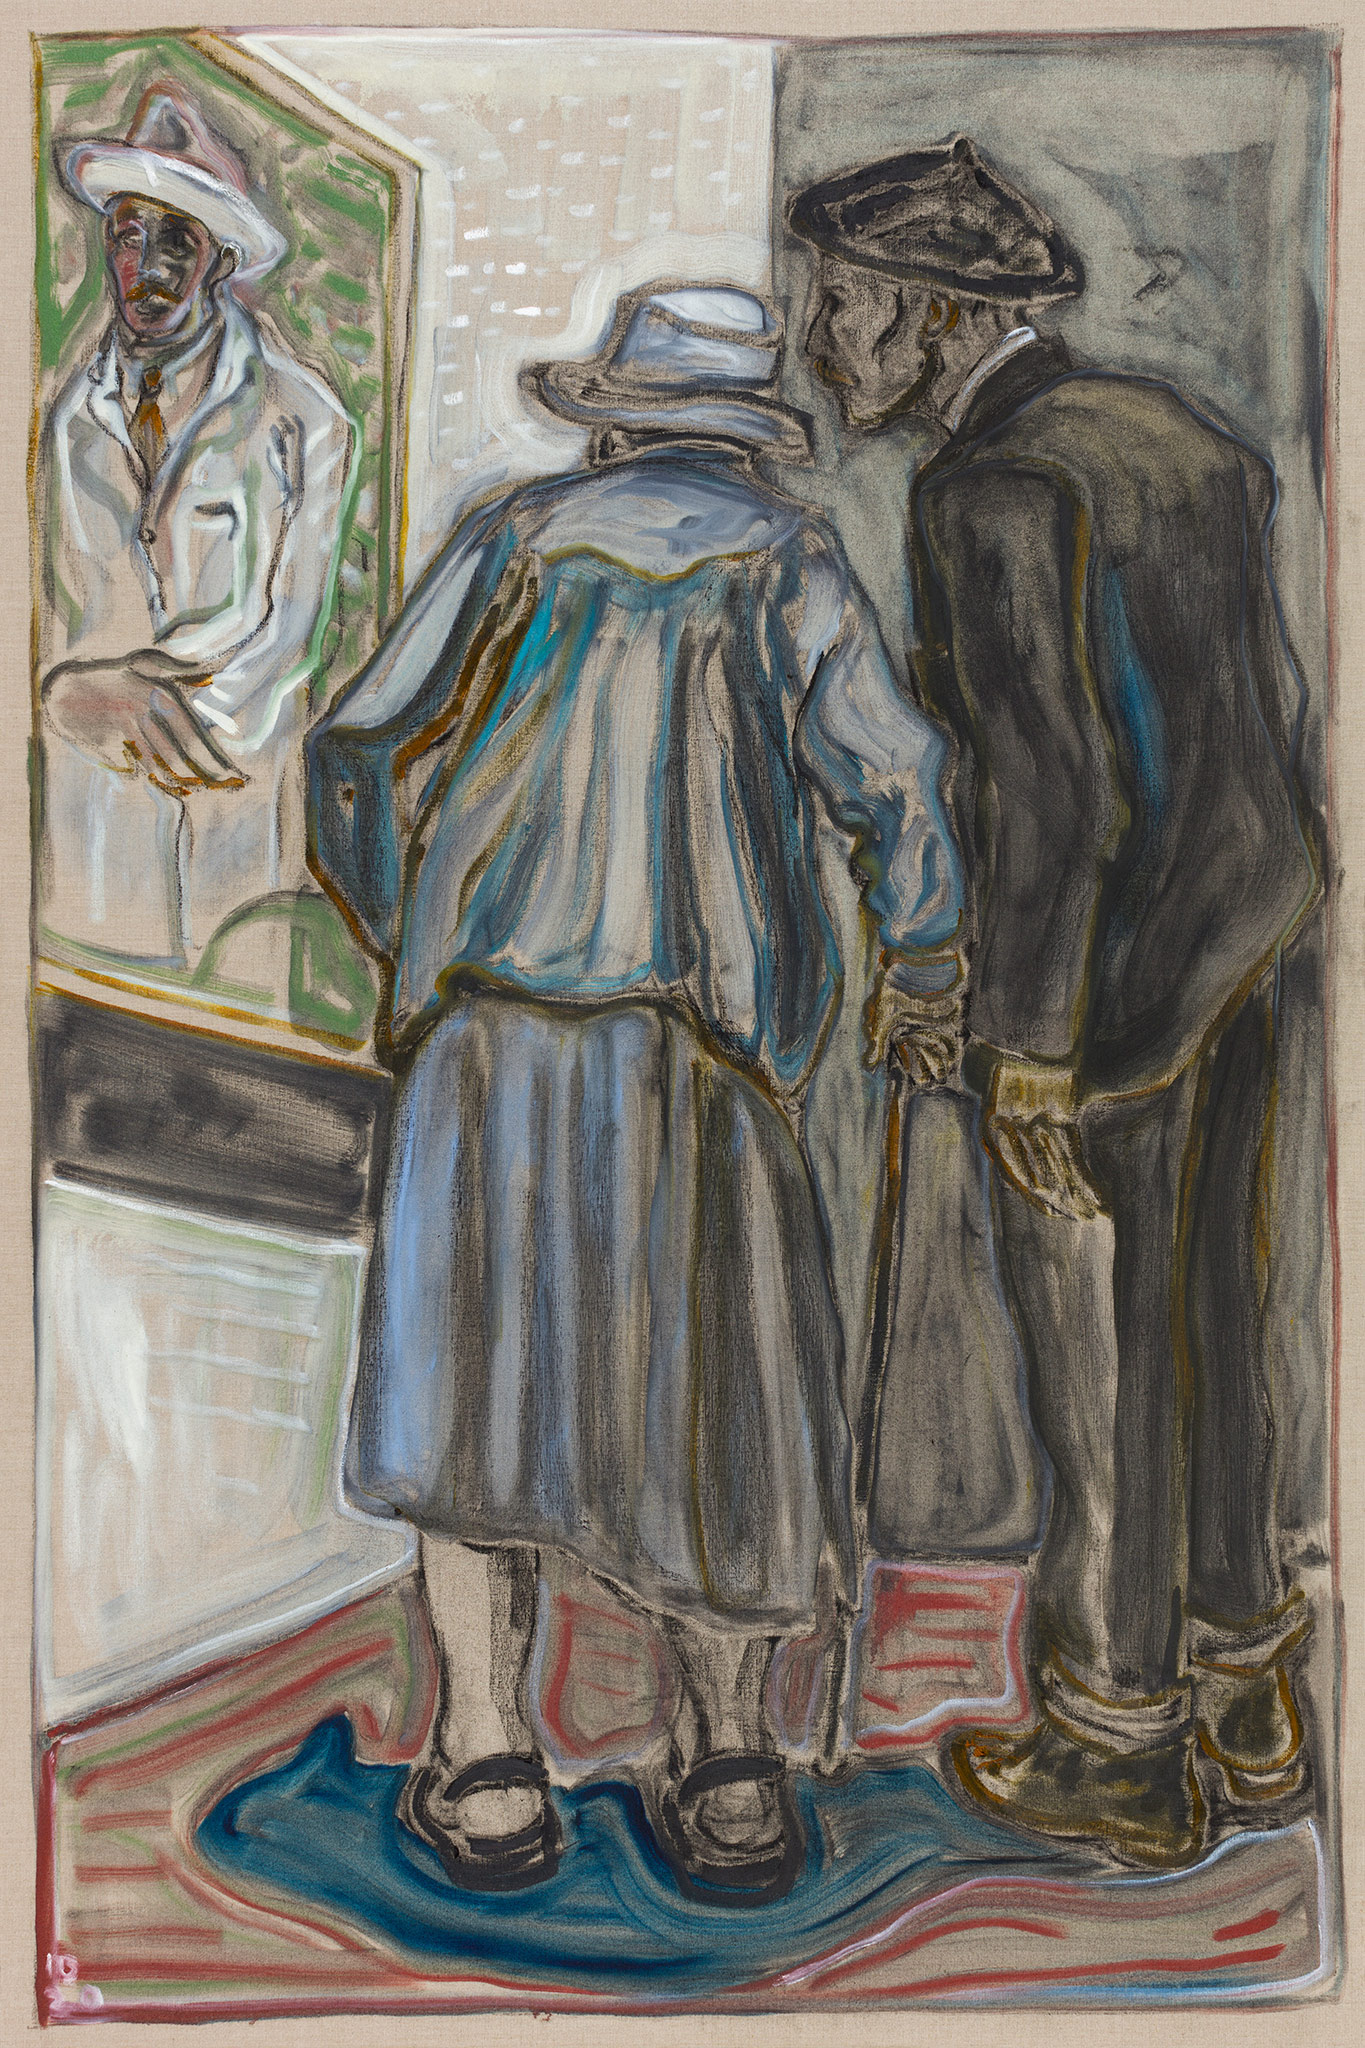 The Wick - Billy Childish, the artist and his mother (2020), Oil and charcoal on linen, 183 x 122 cm